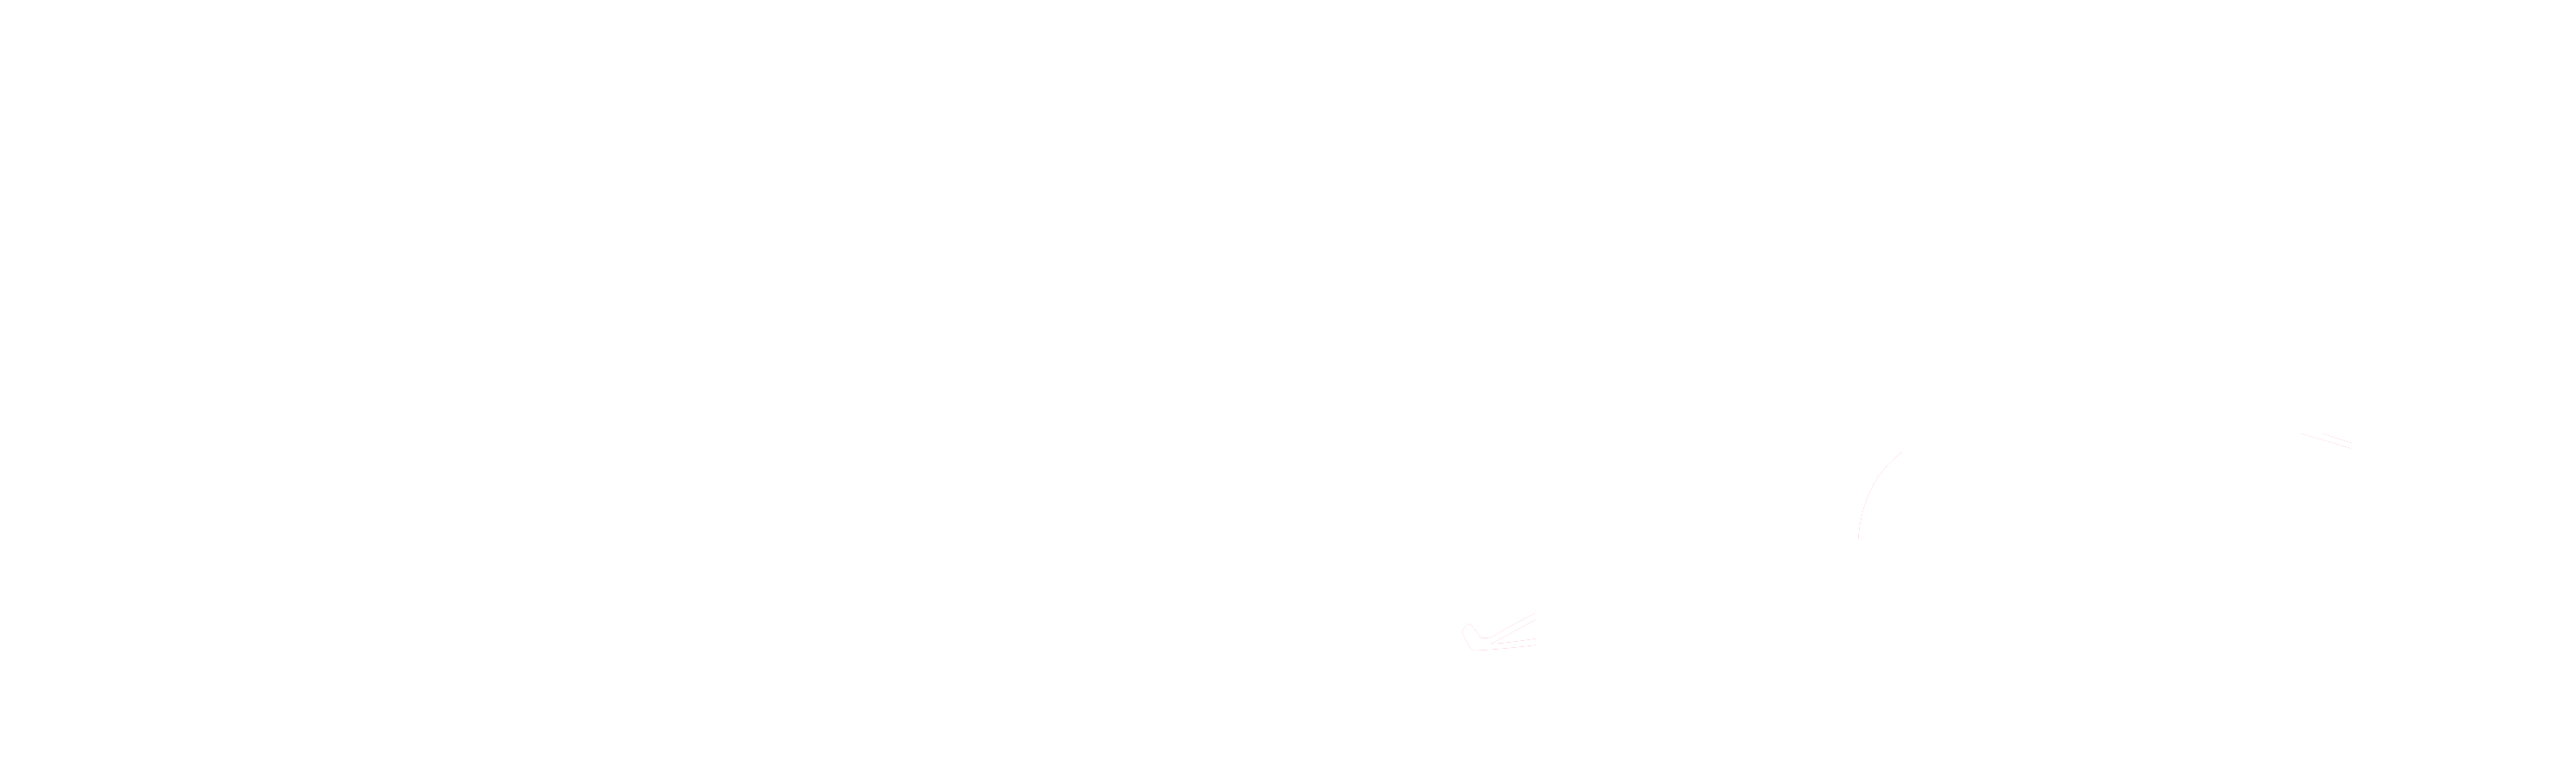 sb-helicopters-logo-2